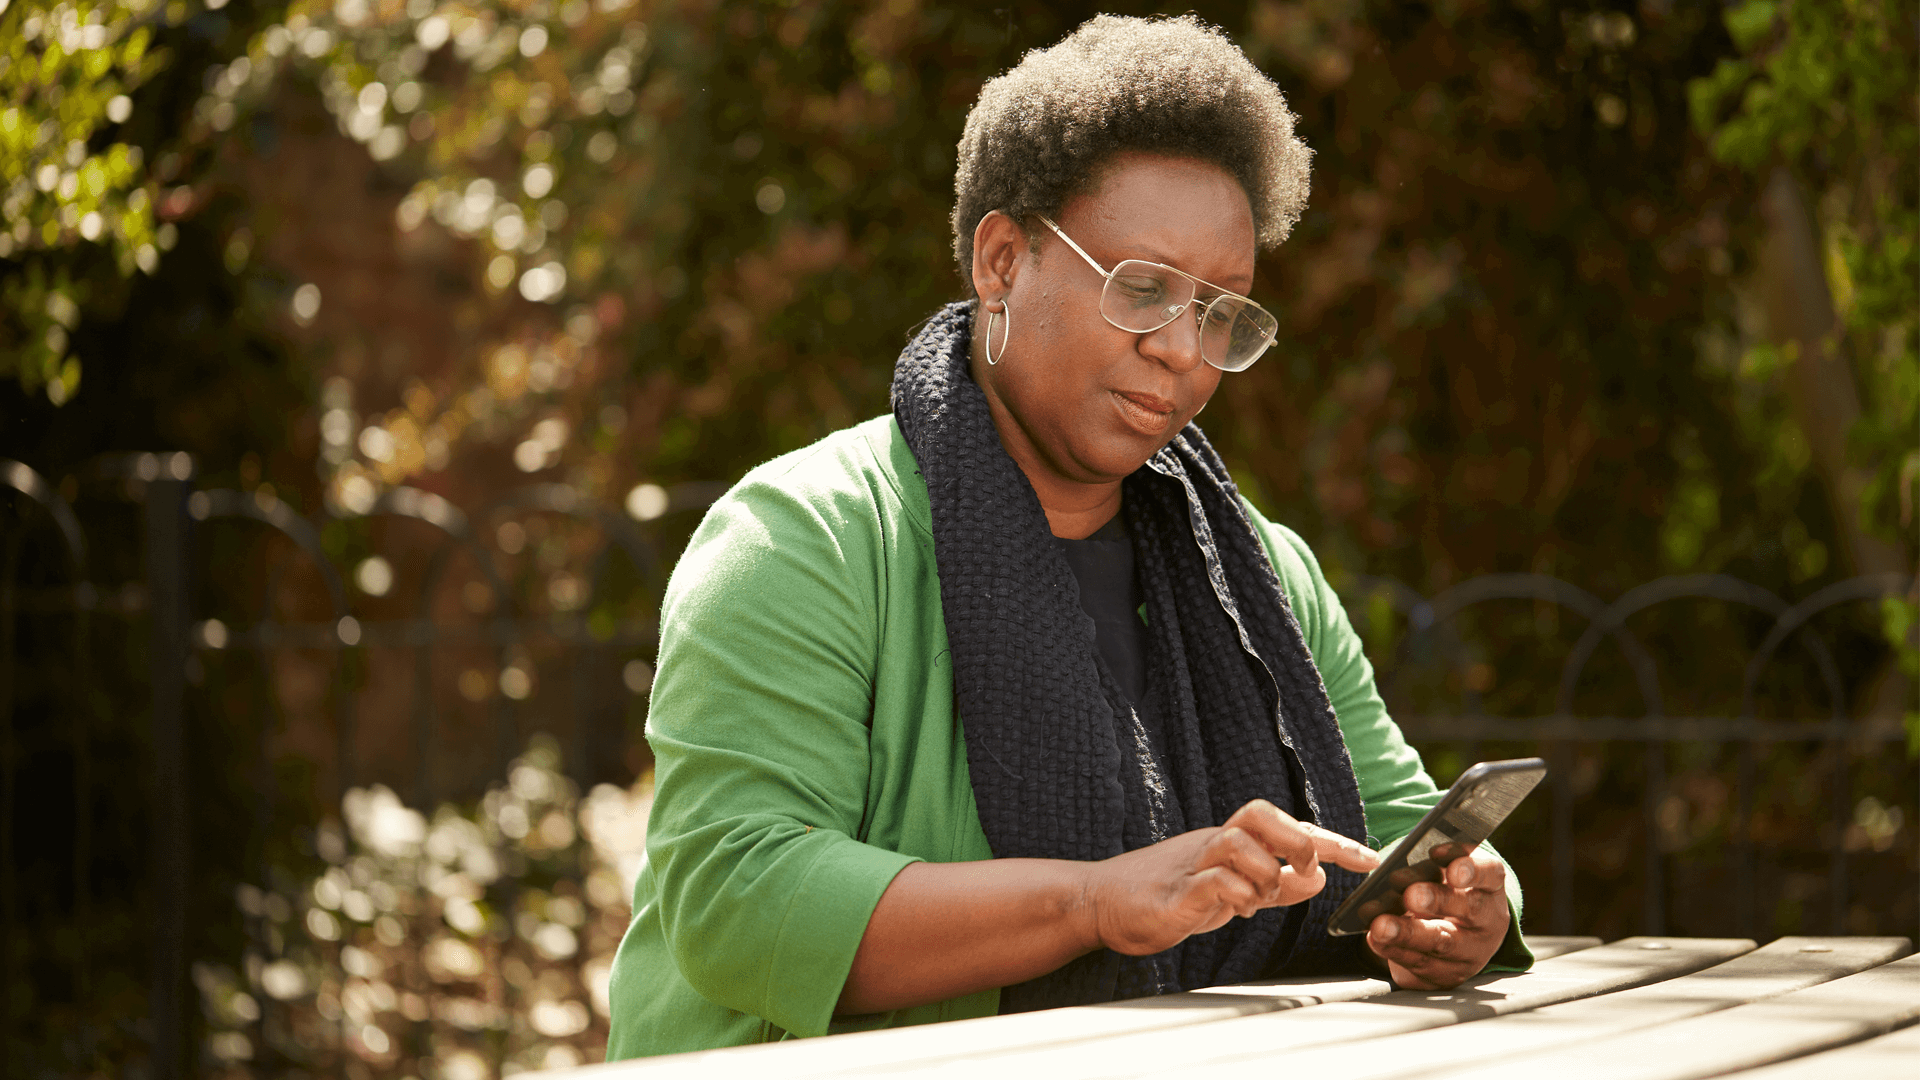 A lady typing on her phone while sitting at a picnic table